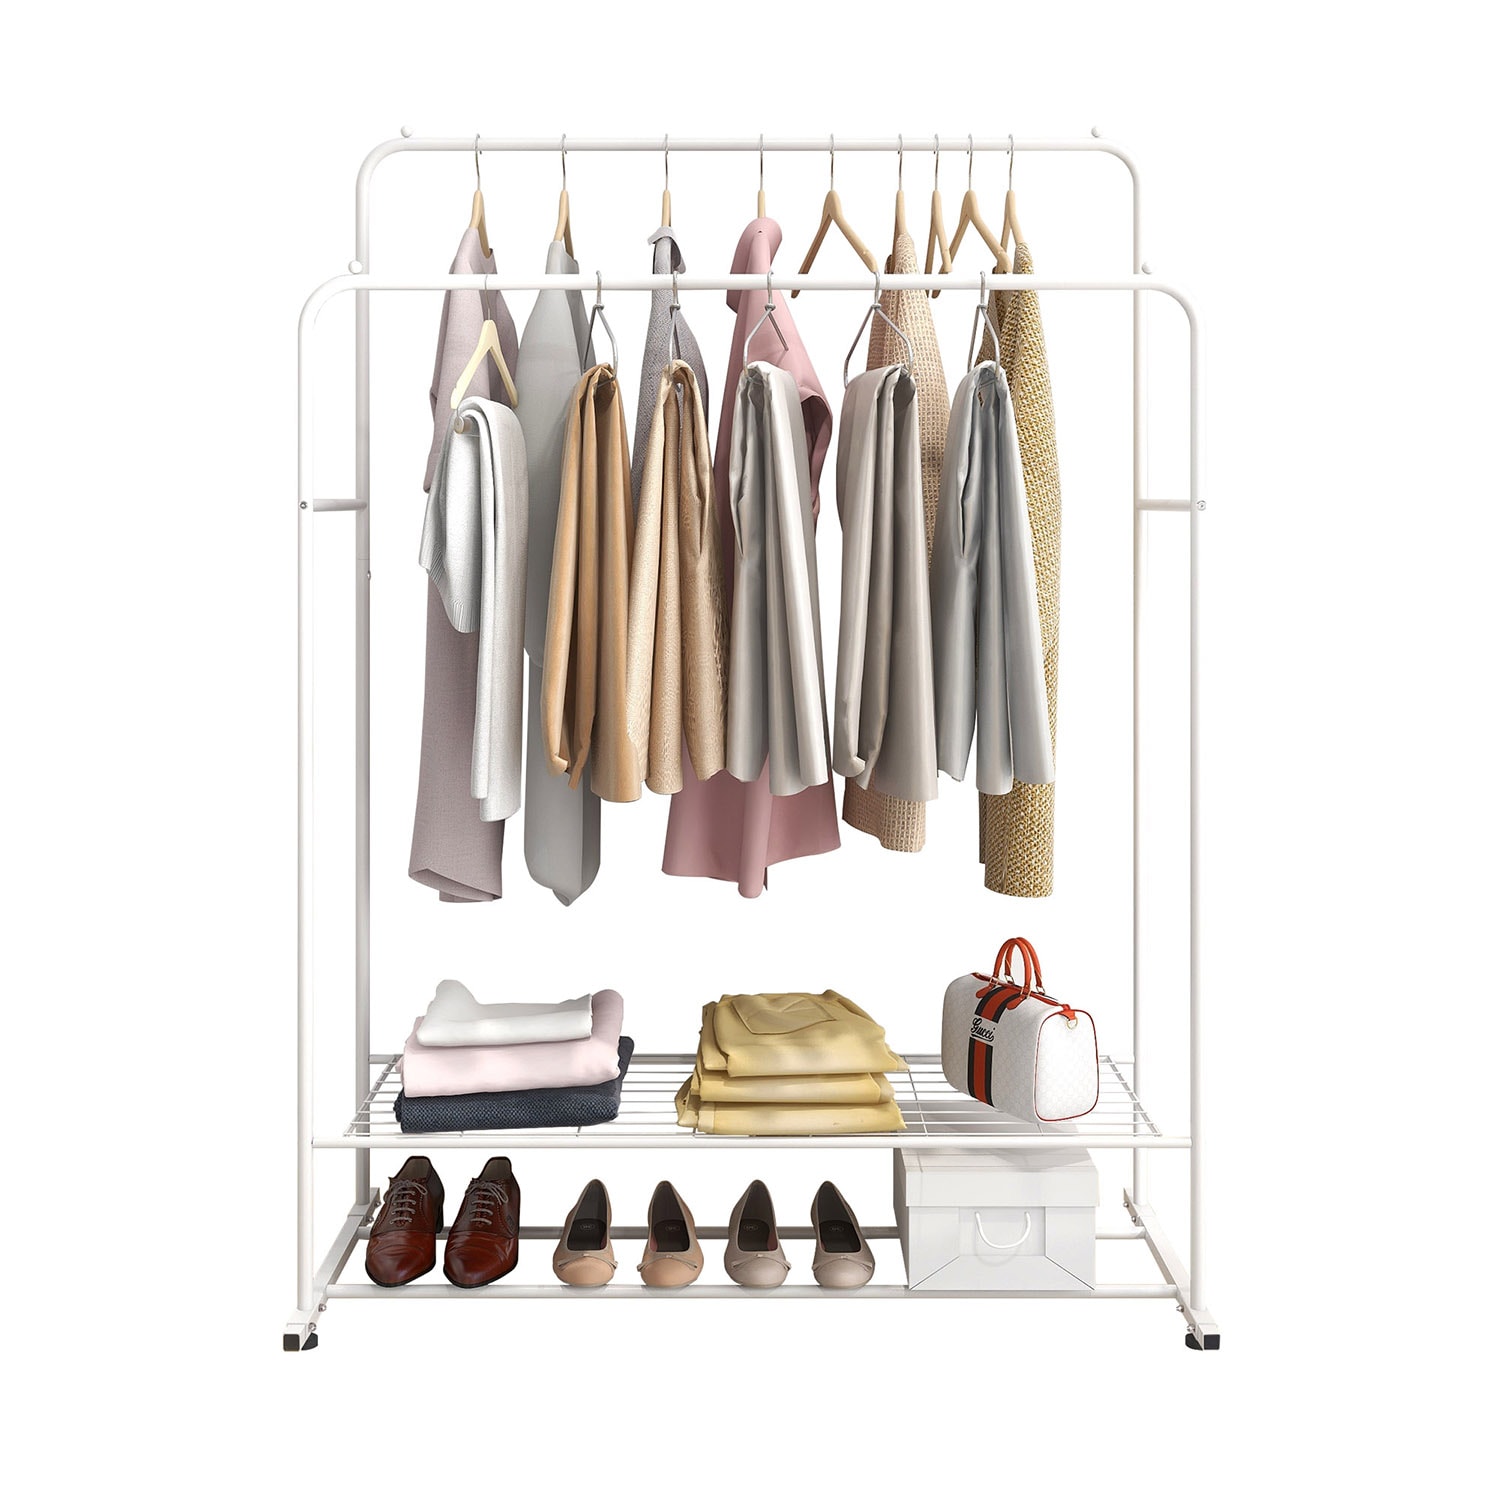 Retail displays, clothing racks for clothing stores, multi-functional  hanger for suits, scarves, shoe hangers, commercial shelves, organizers (